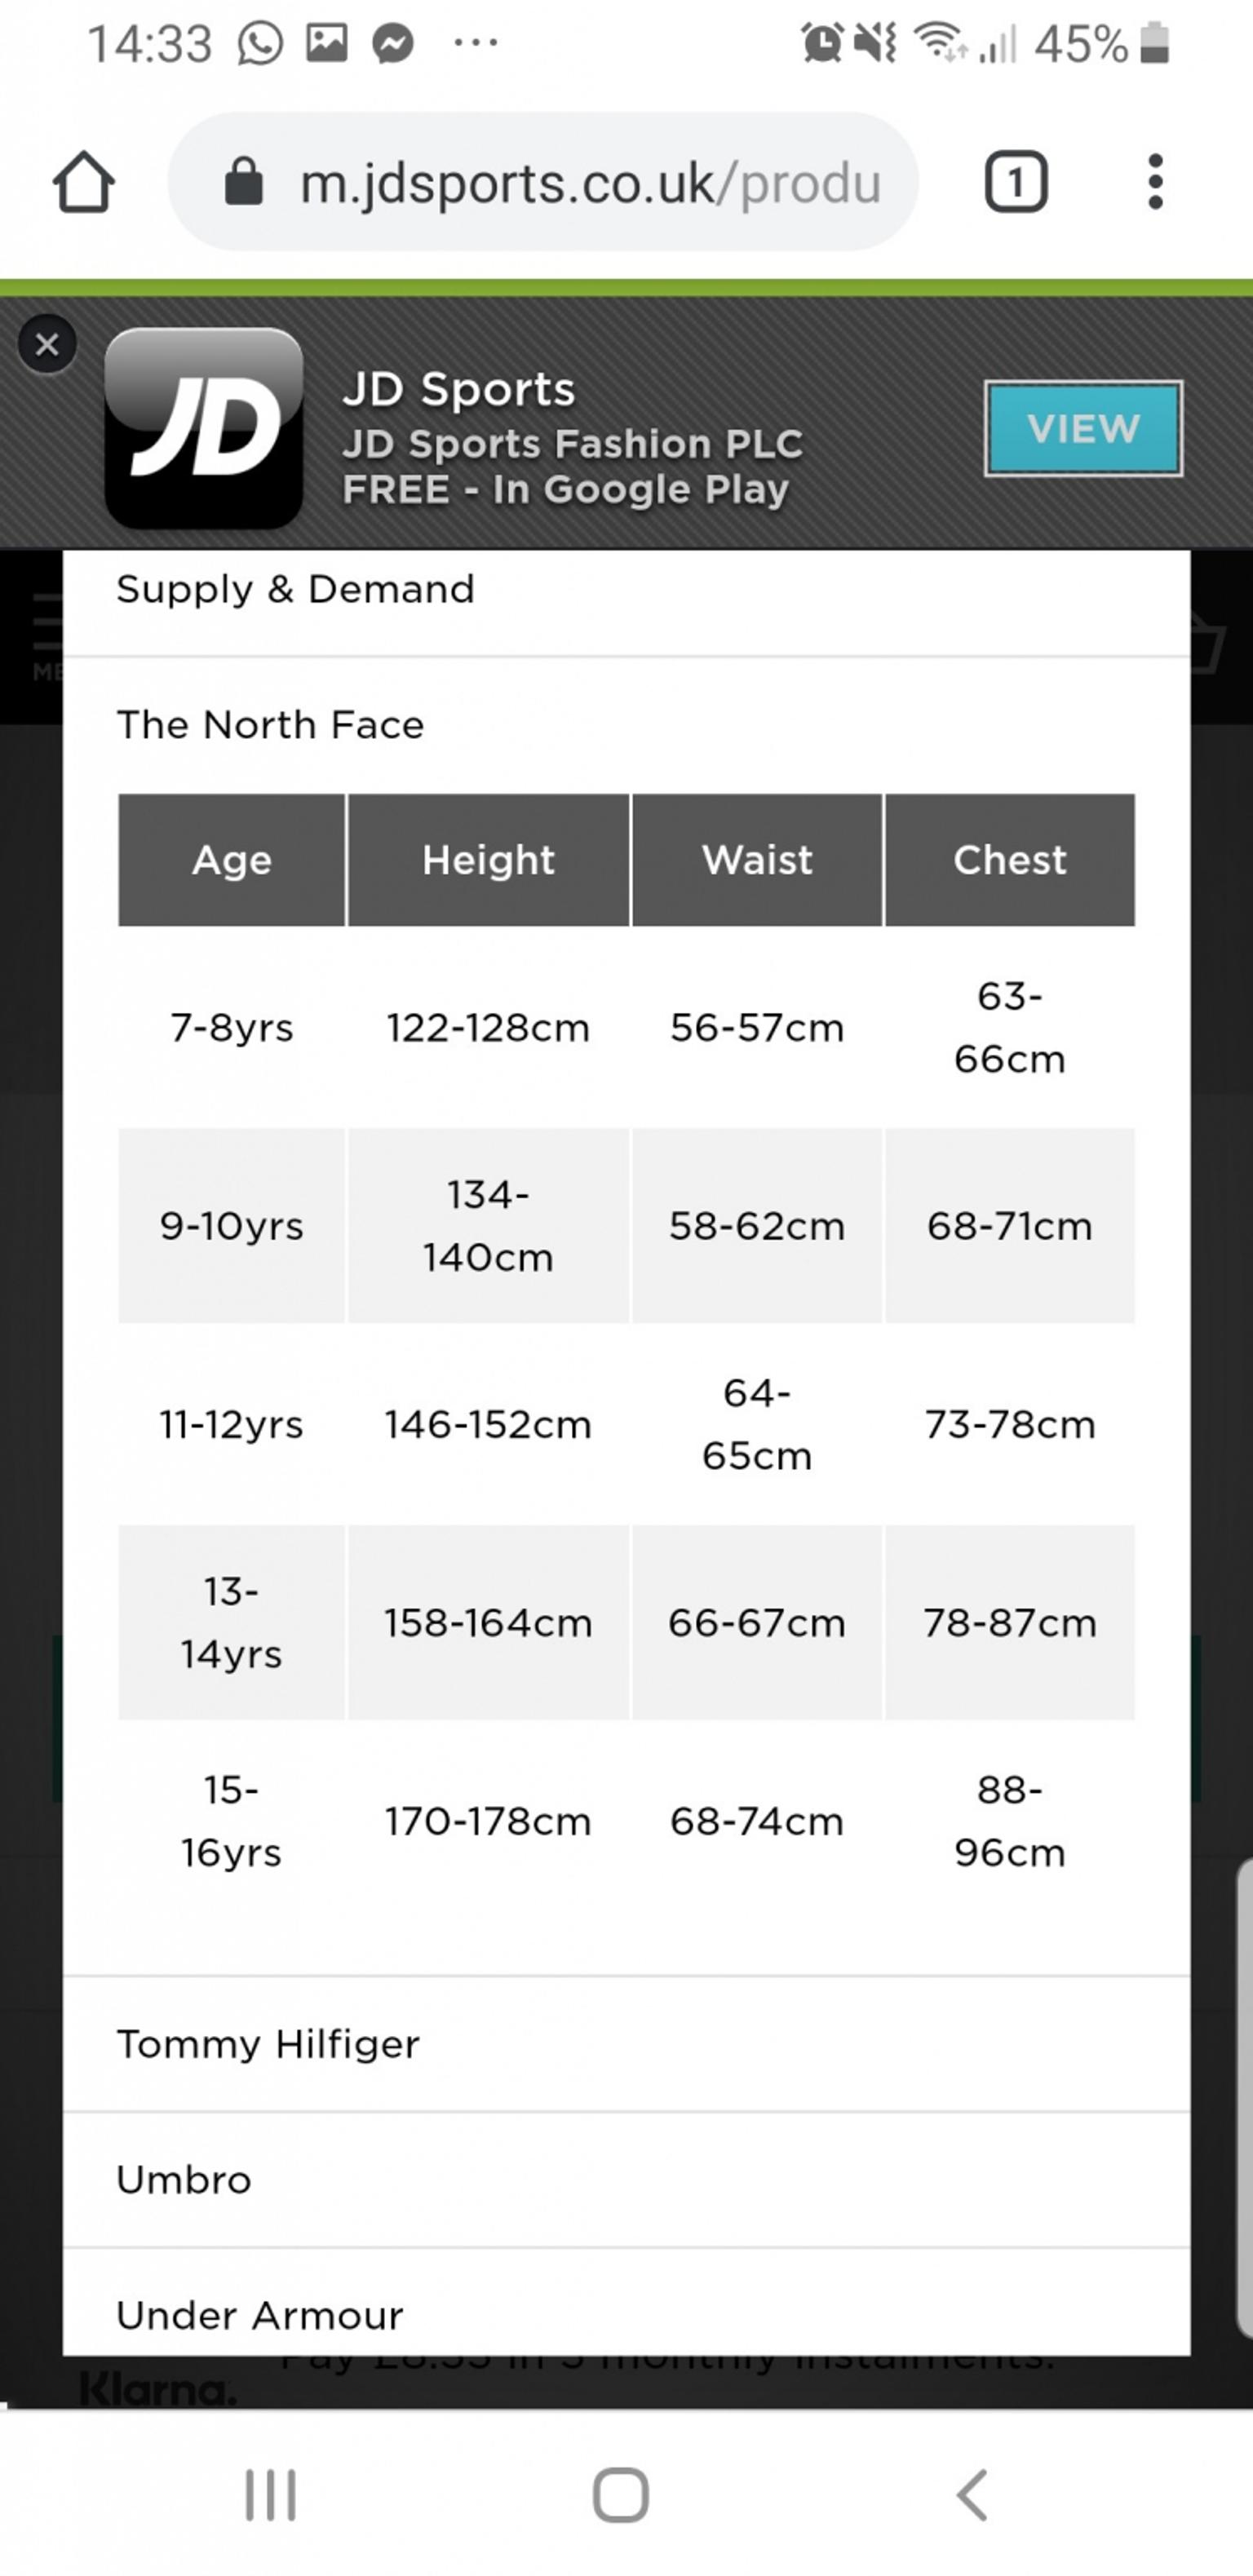 north face childrens sizes